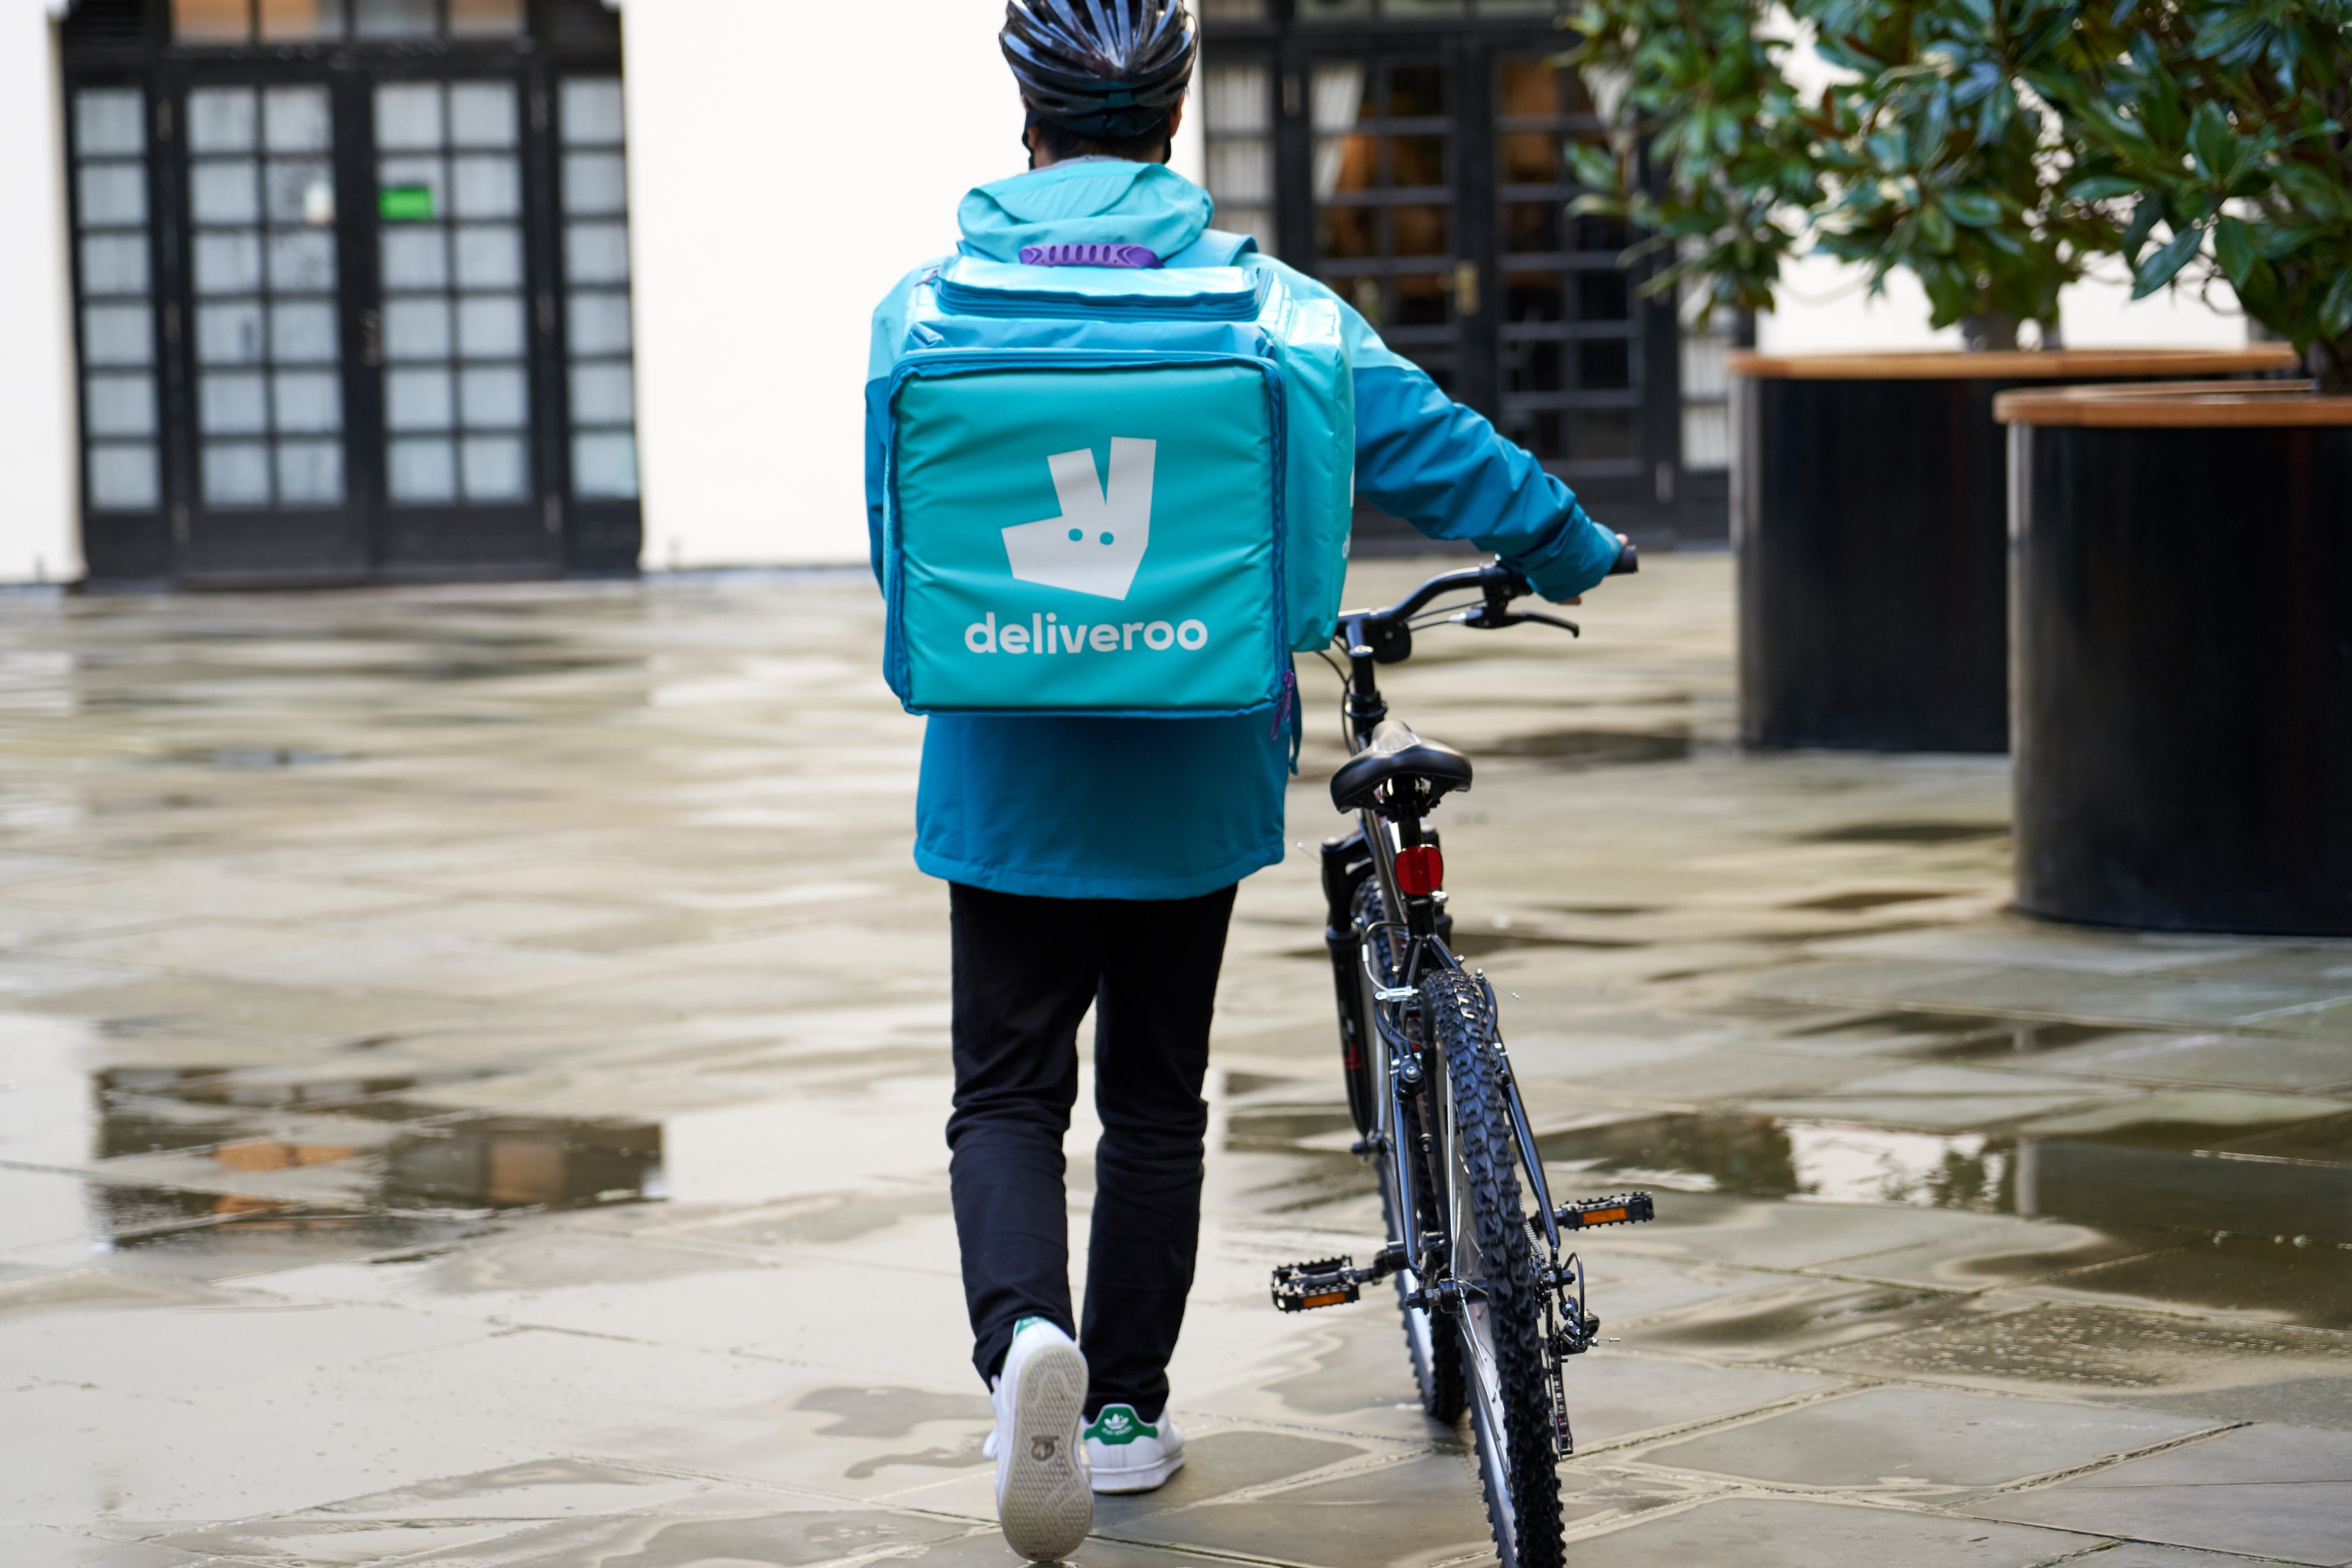 Deliveroo shares were higher due to reports of takeover interest (Deliveroo/PA)